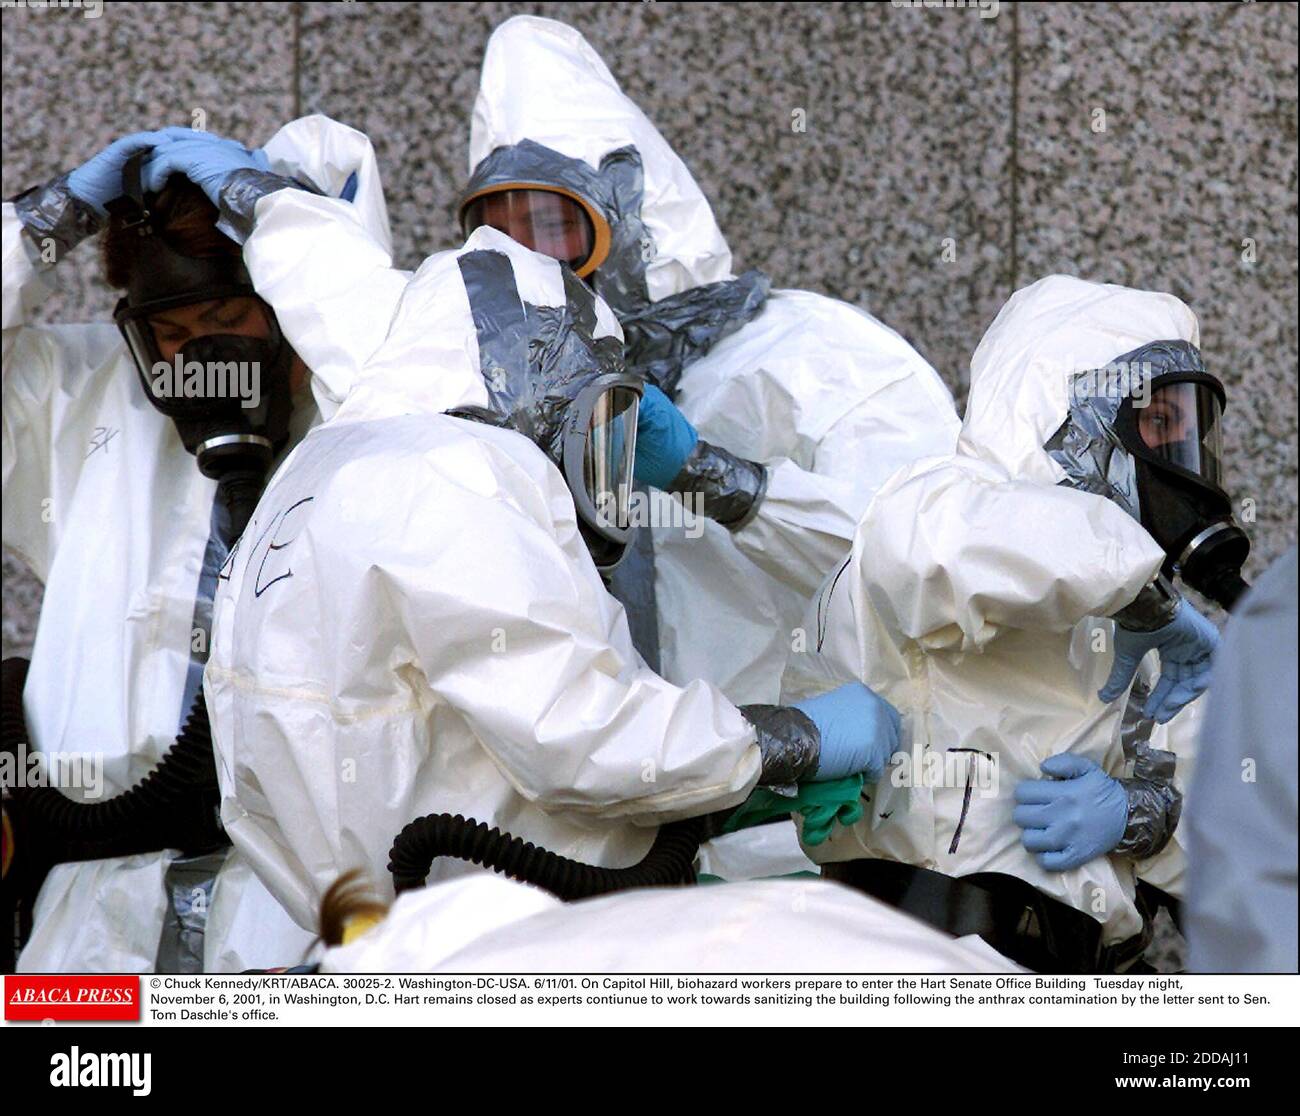 NO FILM, NO VIDEO, NO TV, NO DOCUMENTARY - © Chuck Kennedy/KRT/ABACA. 30025-2. Washington-DC-USA. 6/11/01. On Capitol Hill, biohazard workers prepare to enter the Hart Senate Office Building Tuesday night, November 6, 2001, in Washington, D.C. Hart remains closed as experts continue to work toward Stock Photo